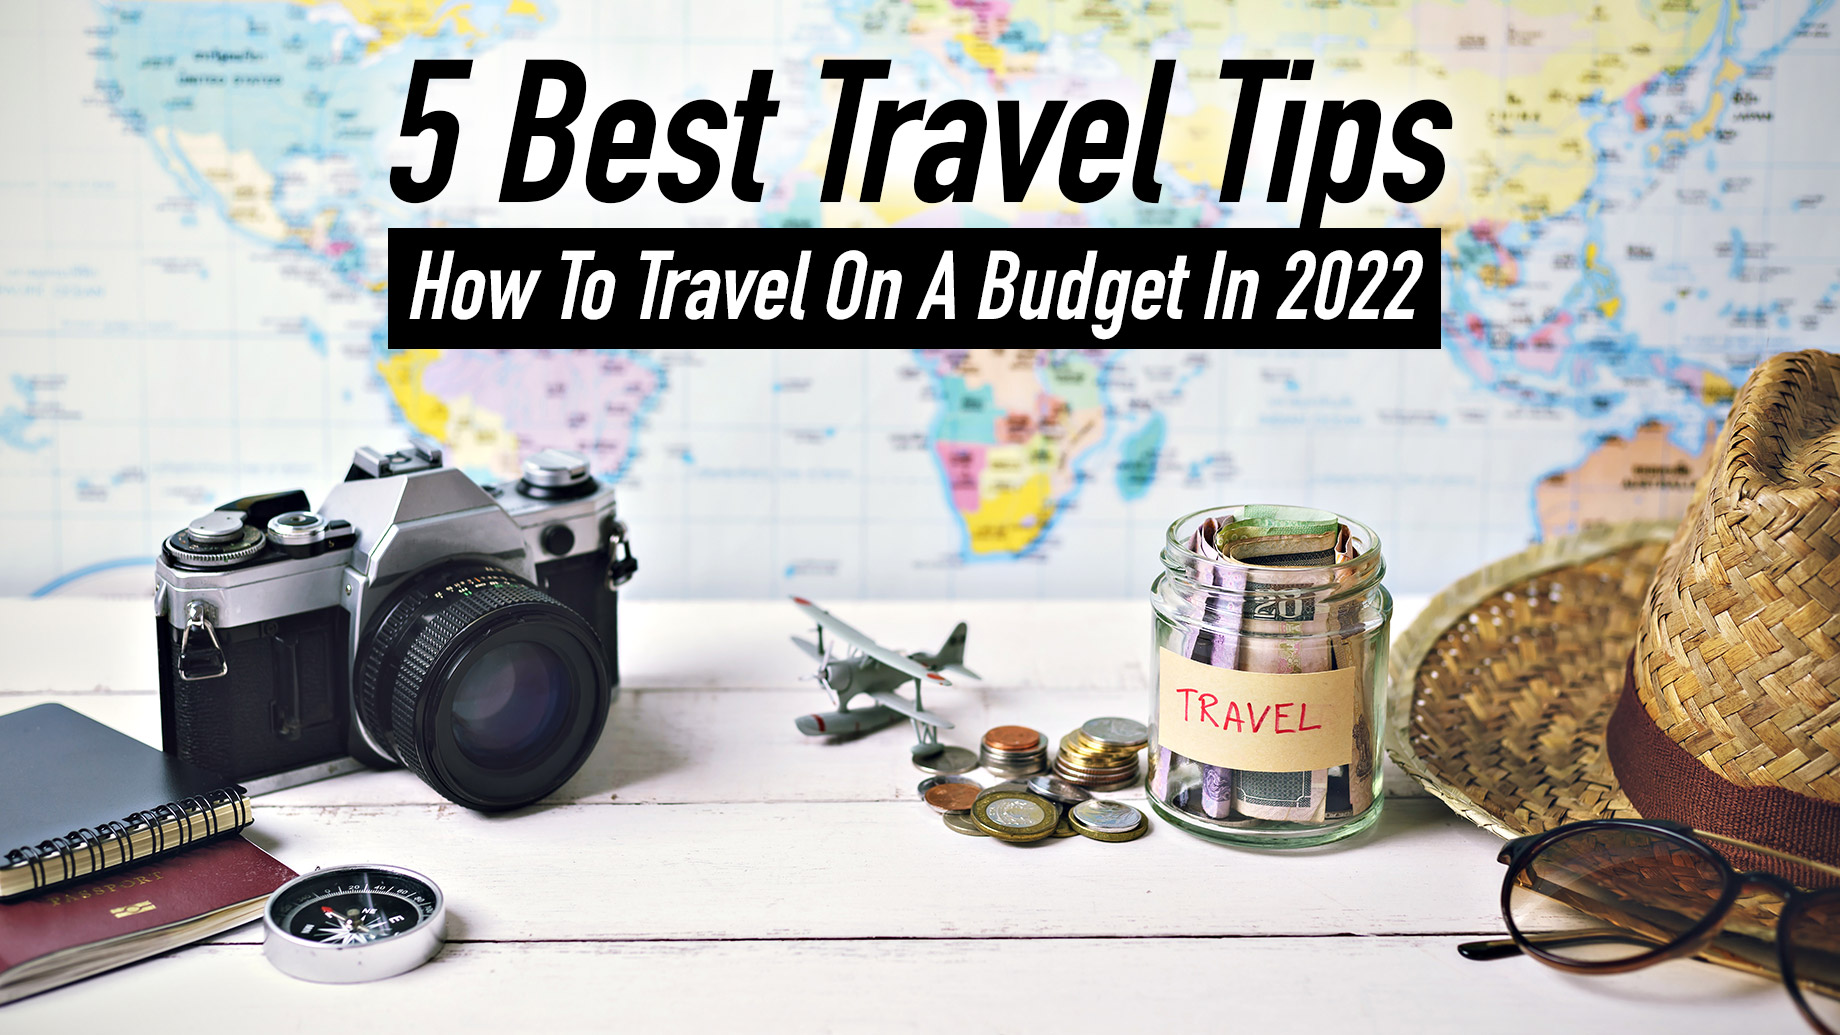 5 Best Travel Tips - How To Travel On A Budget In 2022